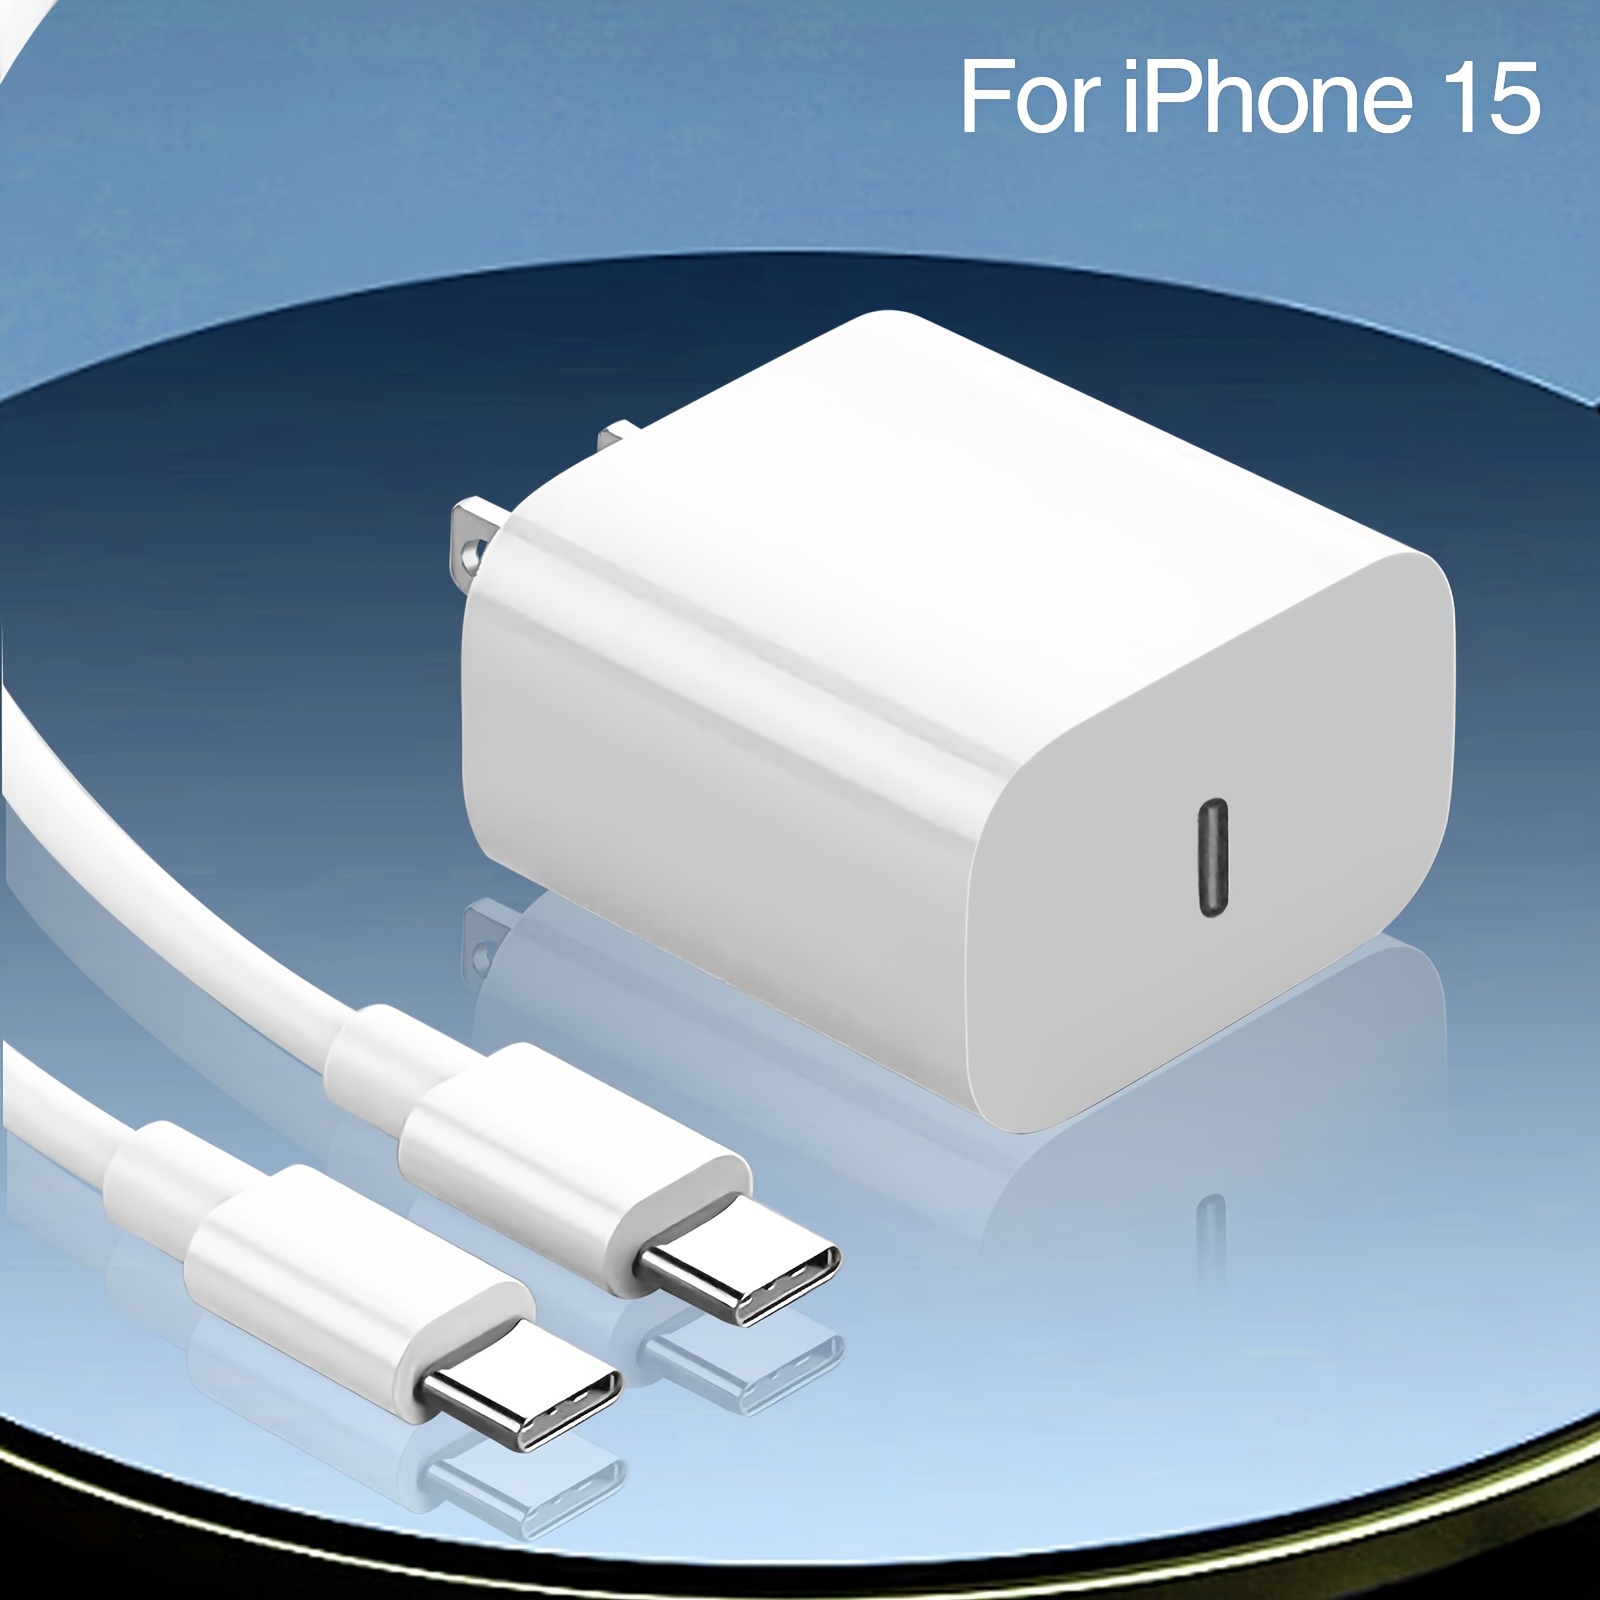 Complete Charger for iPhone 15 Pro Max - 2m Cable and Wall Charger